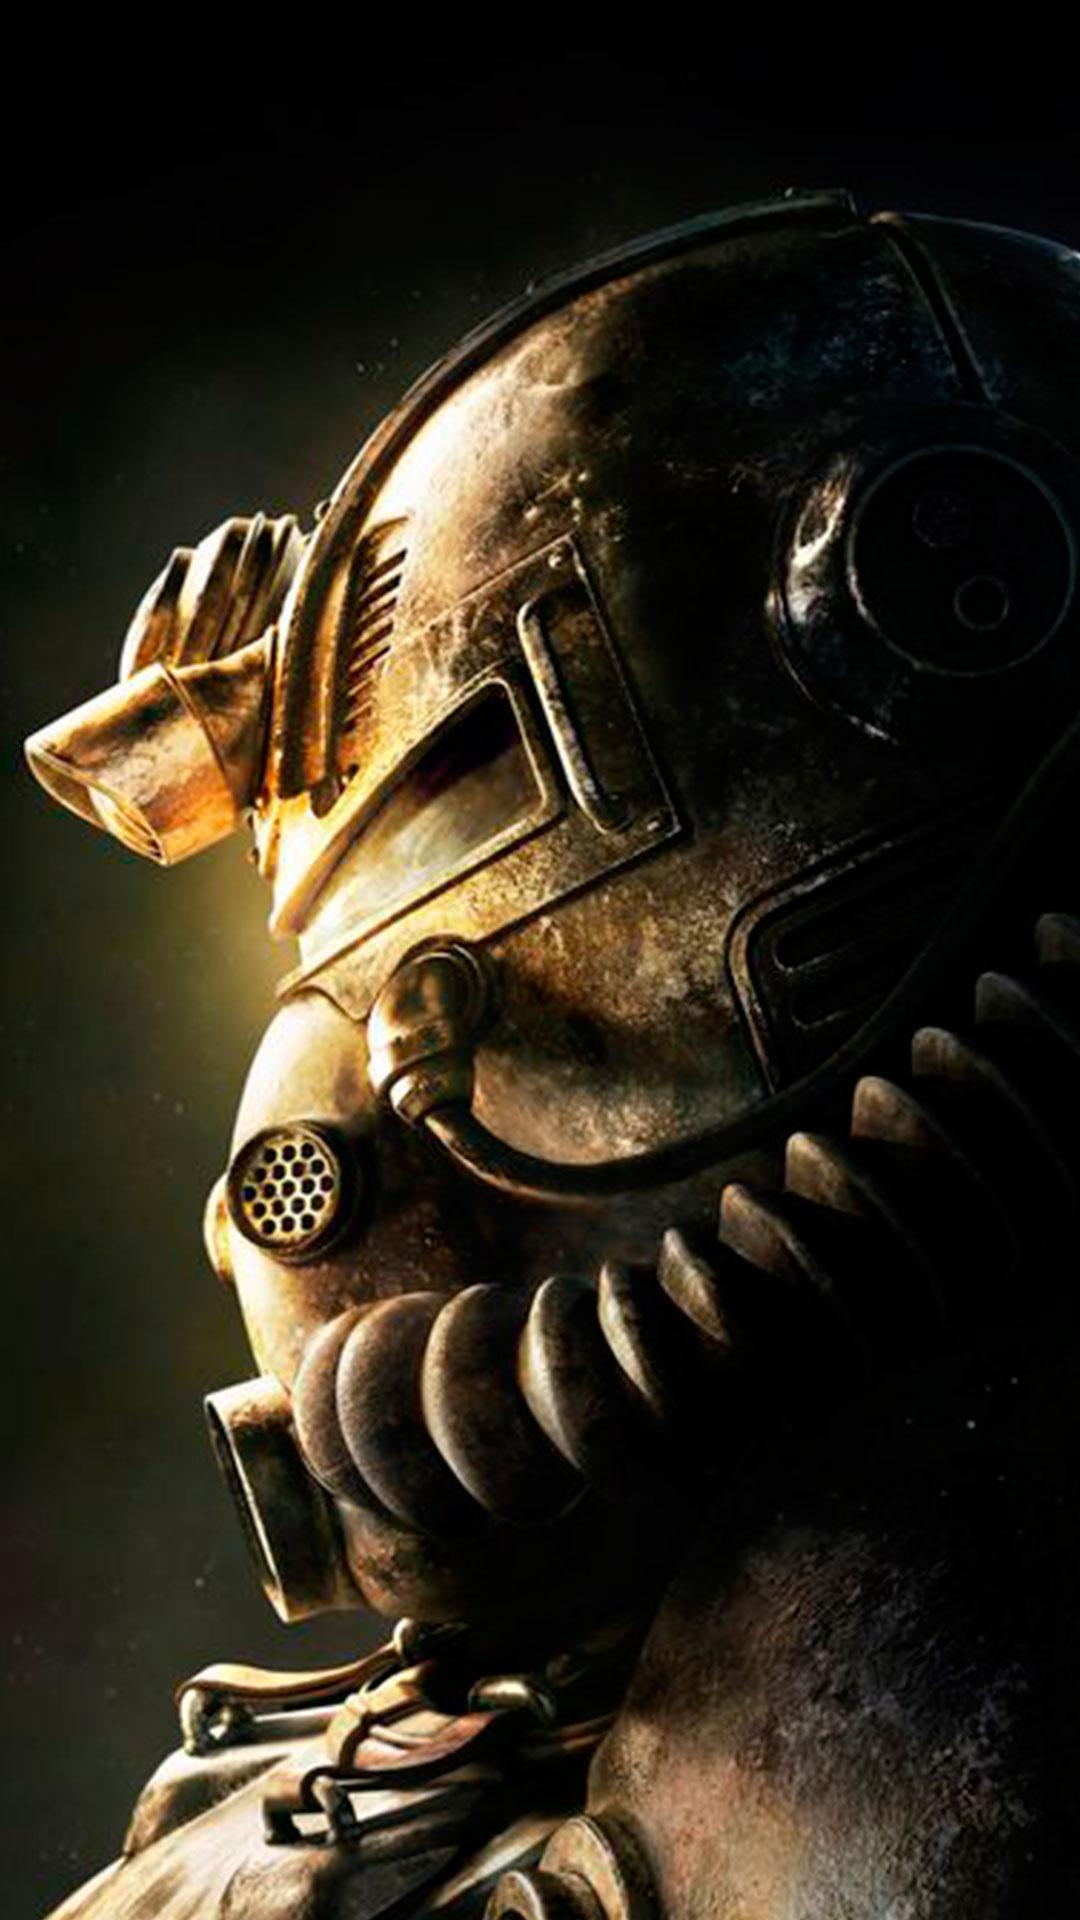 Fallout 76 Wallpapers Hd For Android Apk Download